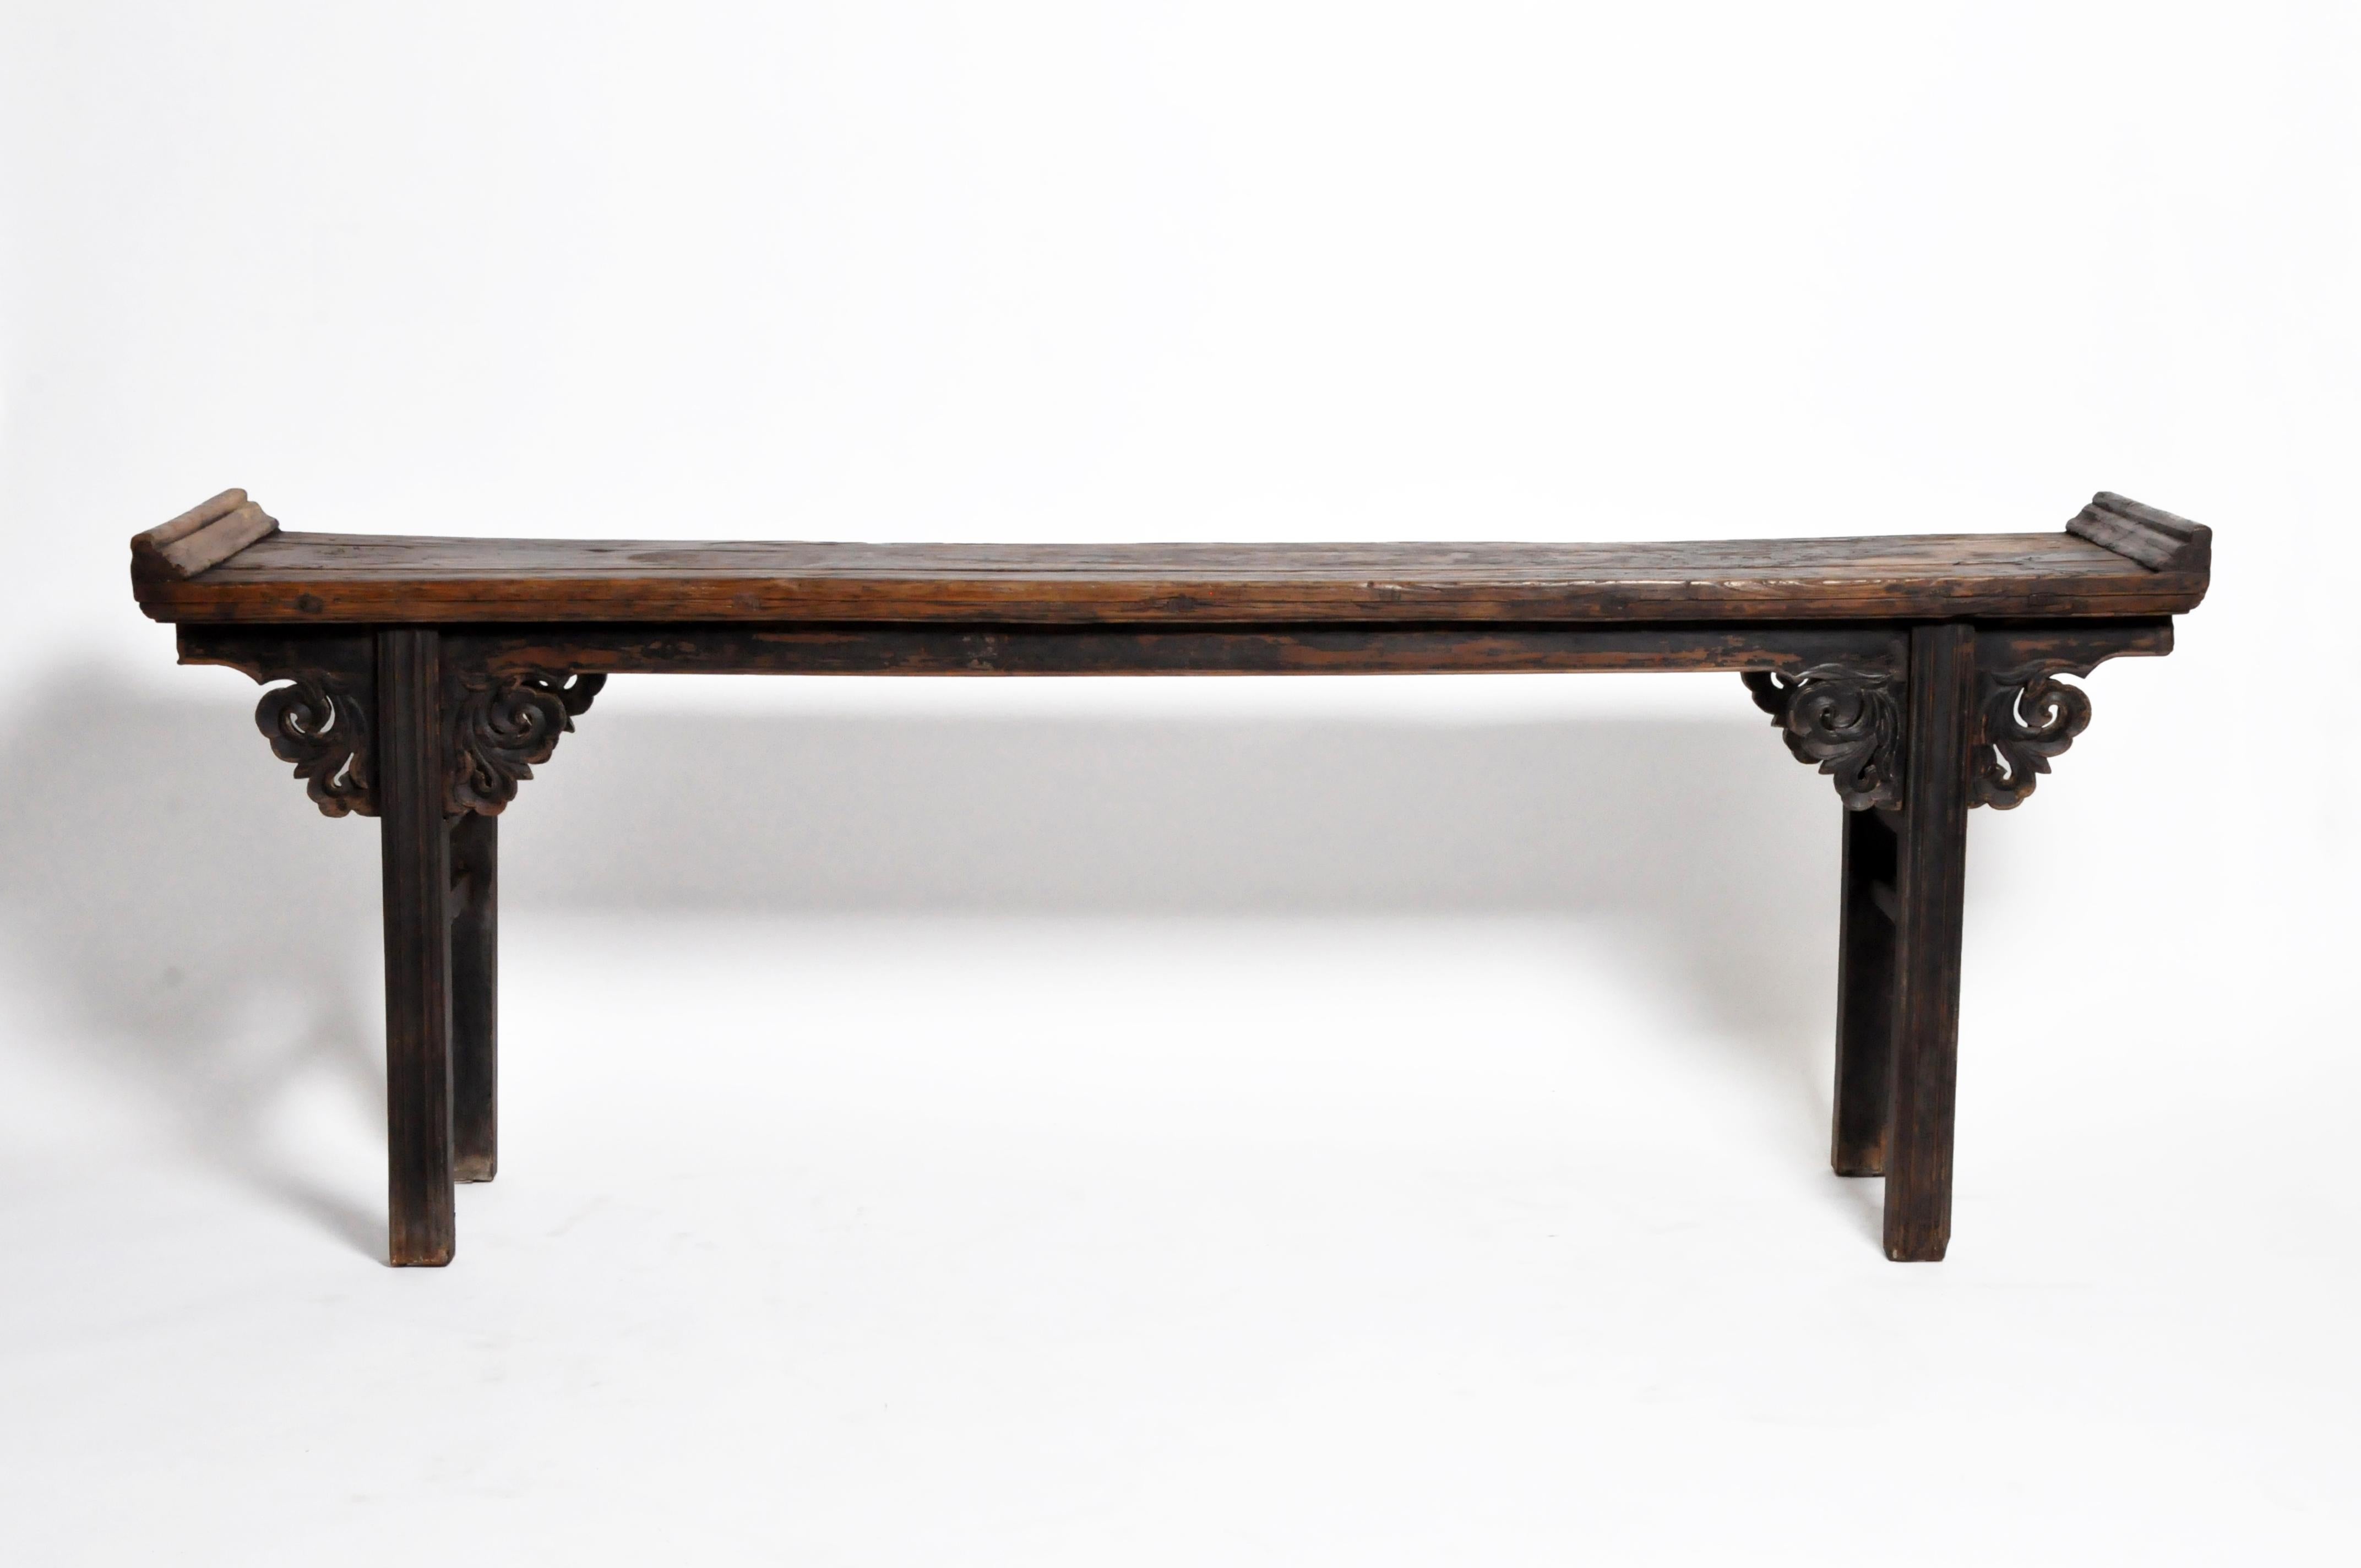 This long and graceful Chinese altar table features a rich oxblood patina that has darkened greatly with age. Oxblood is one of the three traditional Chinese lacquers. Red and black lacquers are fully opaque. Oxblood lacquer, however, is translucent